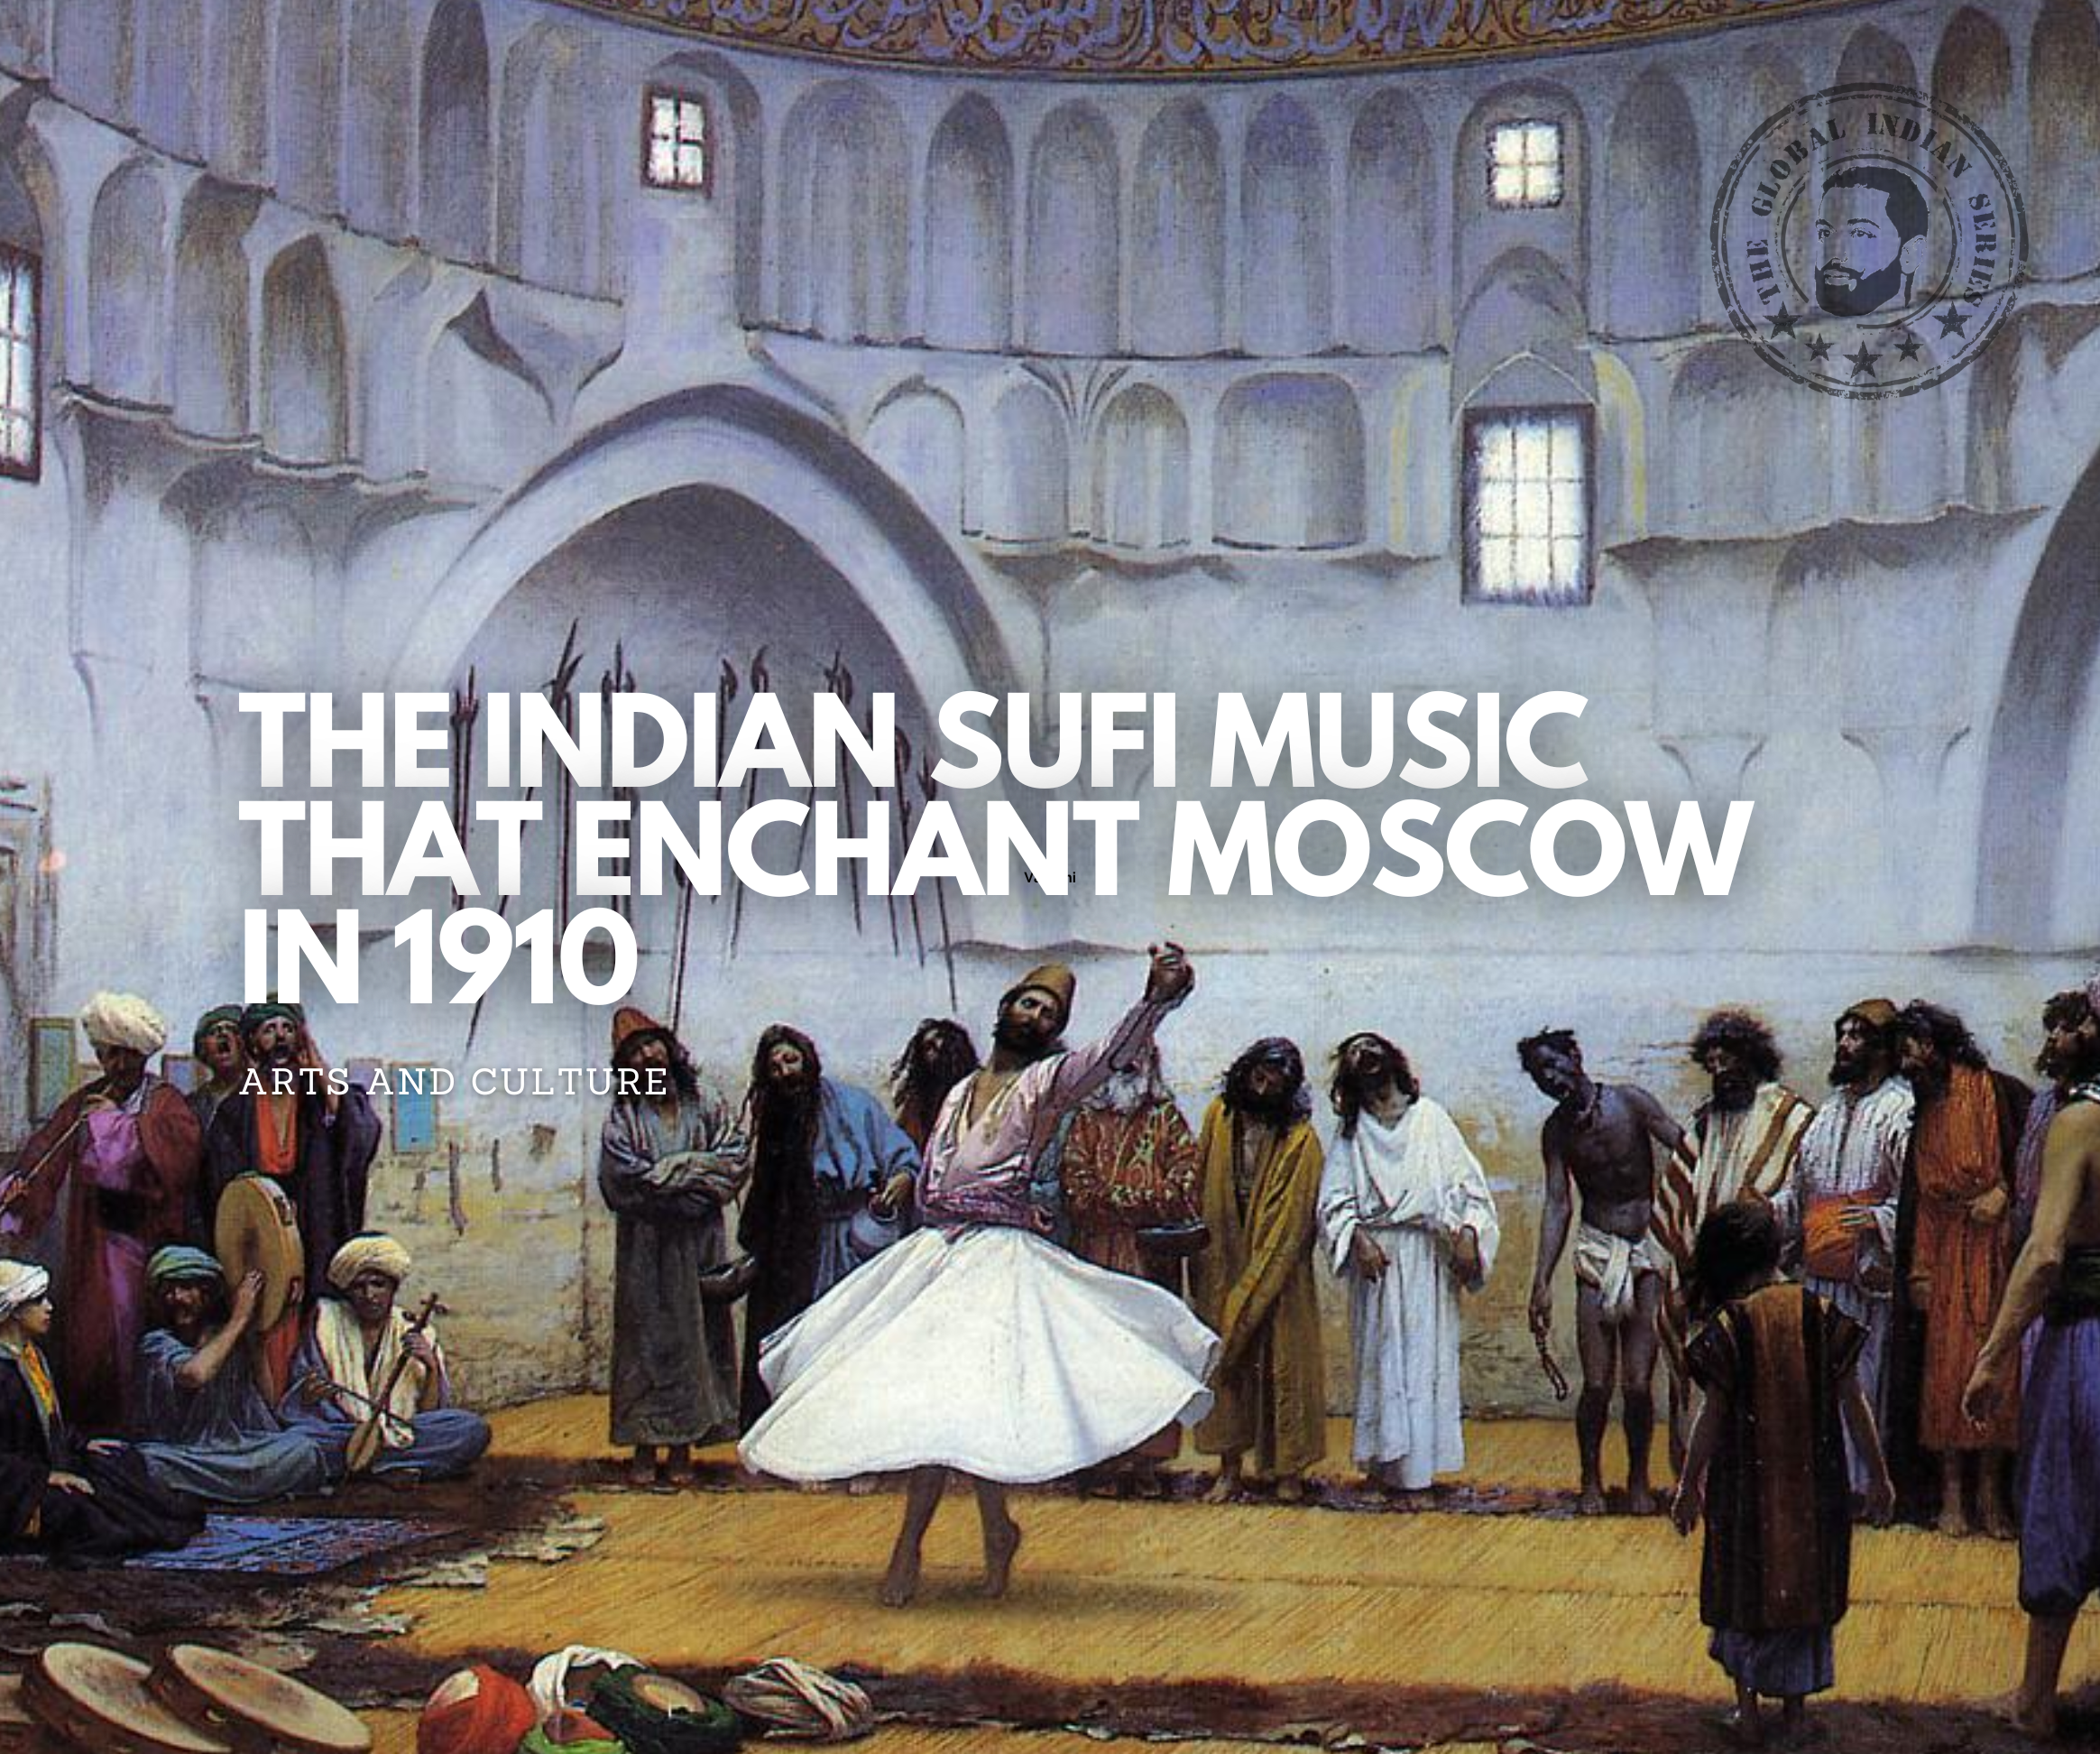 The Indian Sufi Music That Enchant Moscow in 1910, showase how Sufi spread influence in Moscow, Russia showcasing enchanting culture of Indian